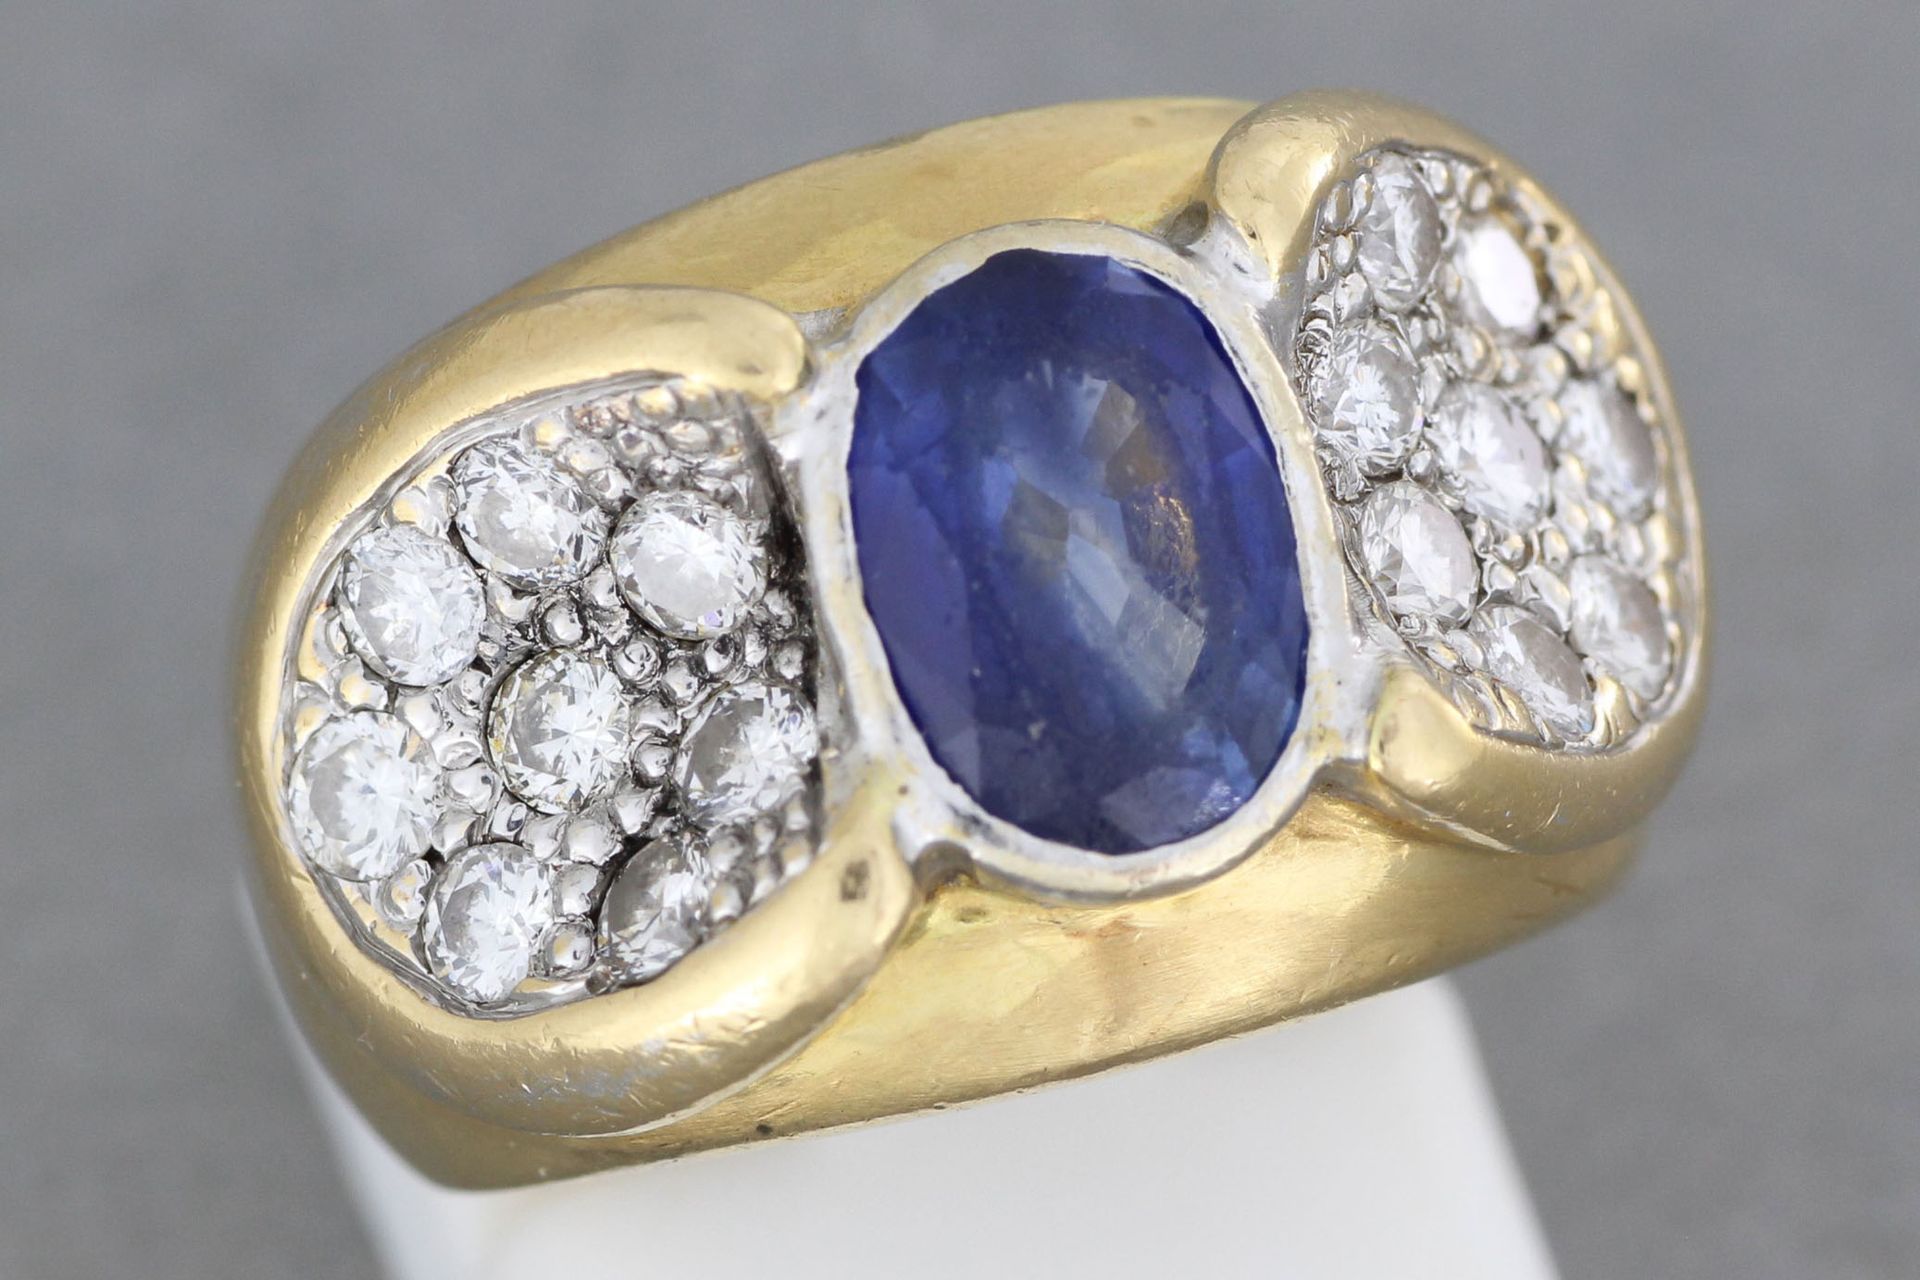 Null Gold ring set with a sapphire and two paved diamonds - Gross weight: 13.1 g